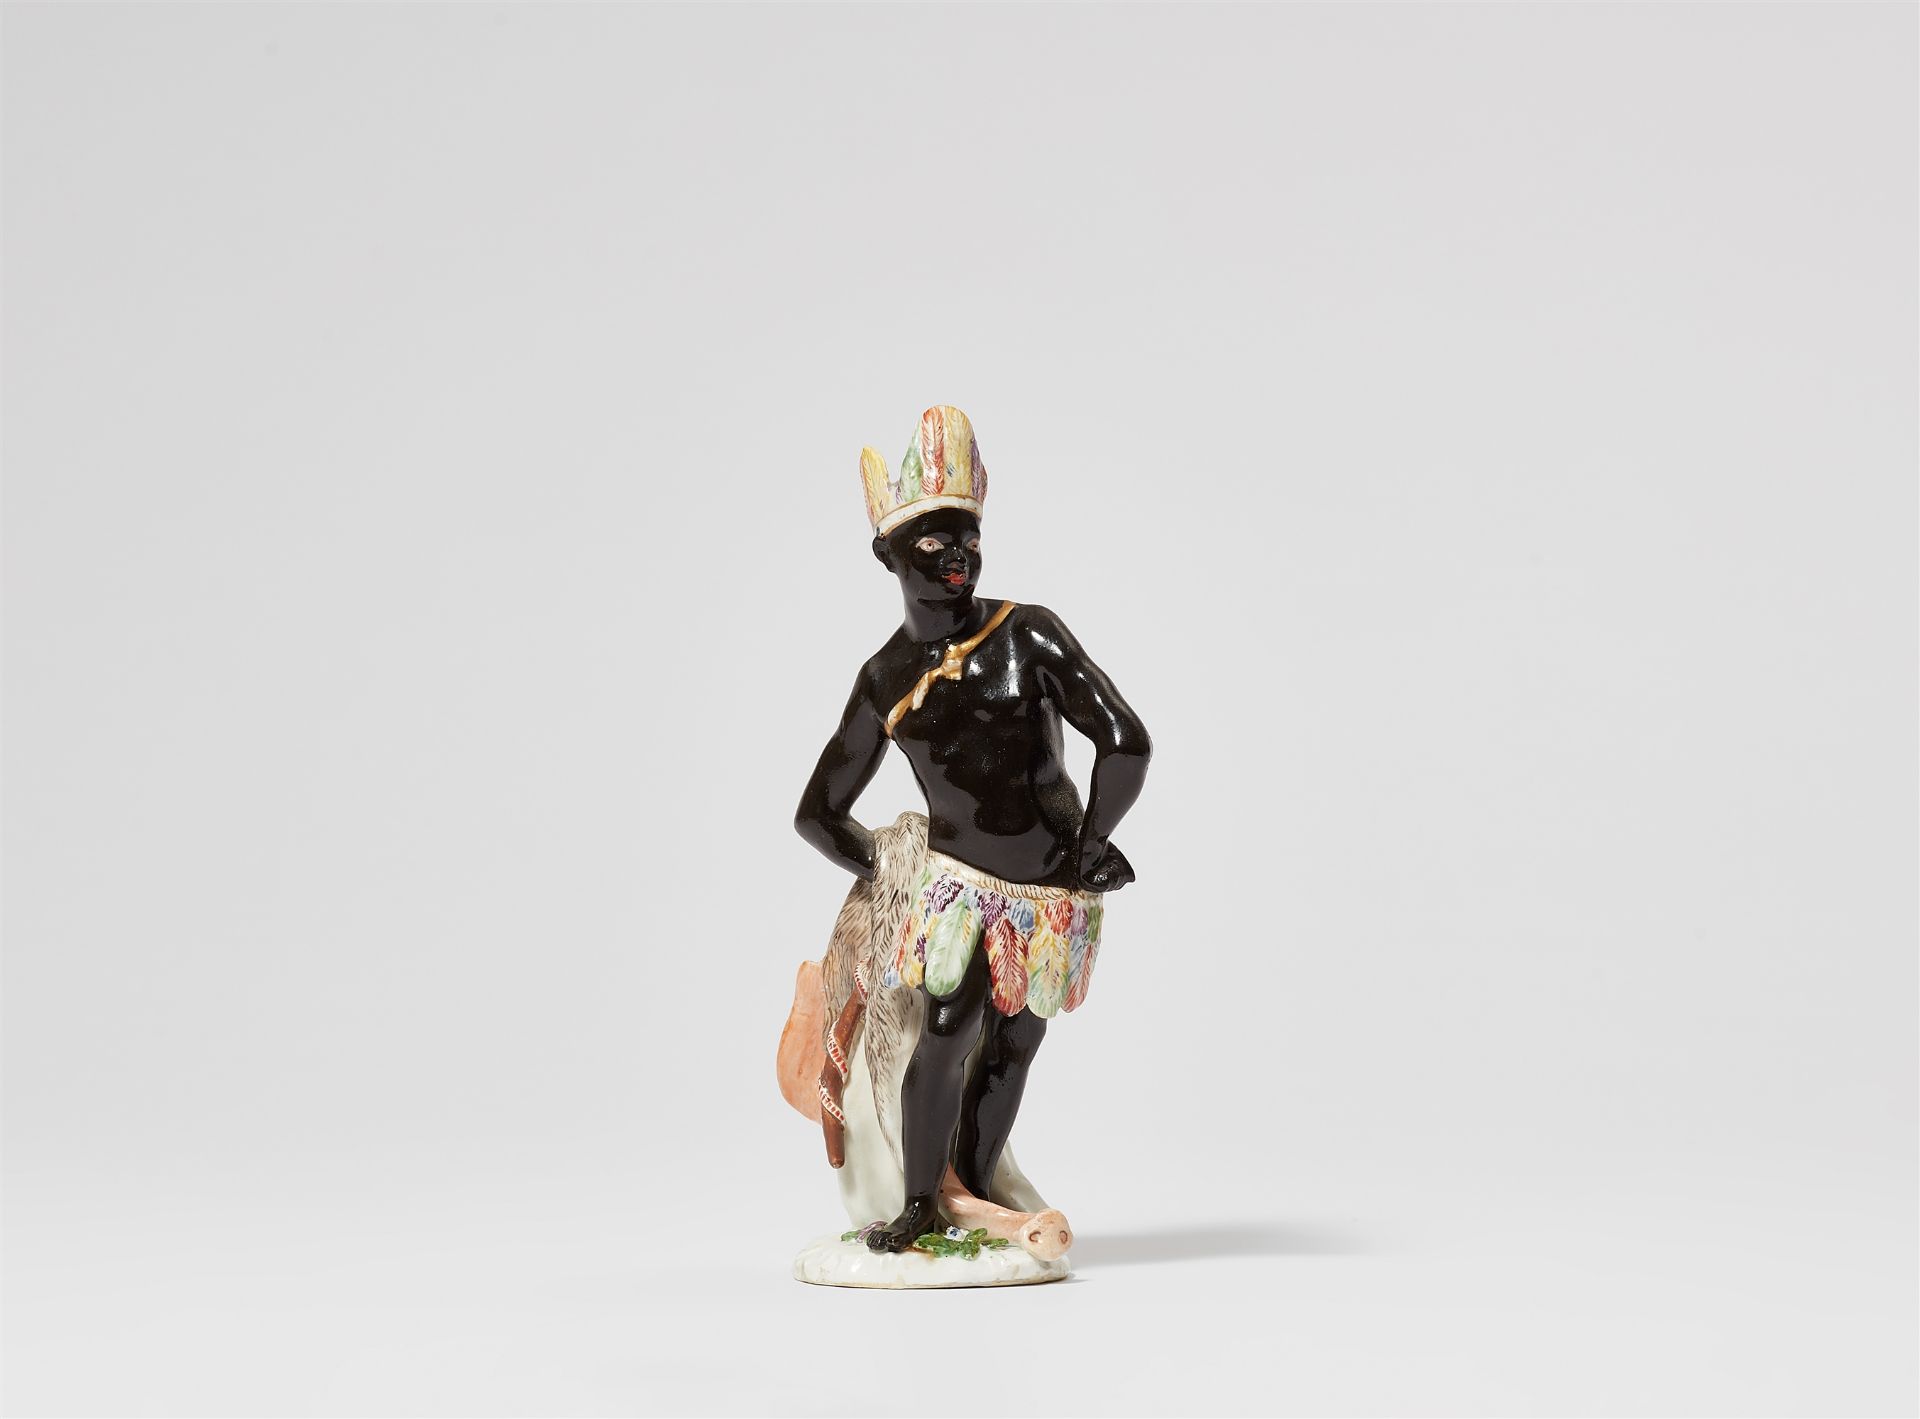 A rare Meissen porcelain figure as an allegory of Africa